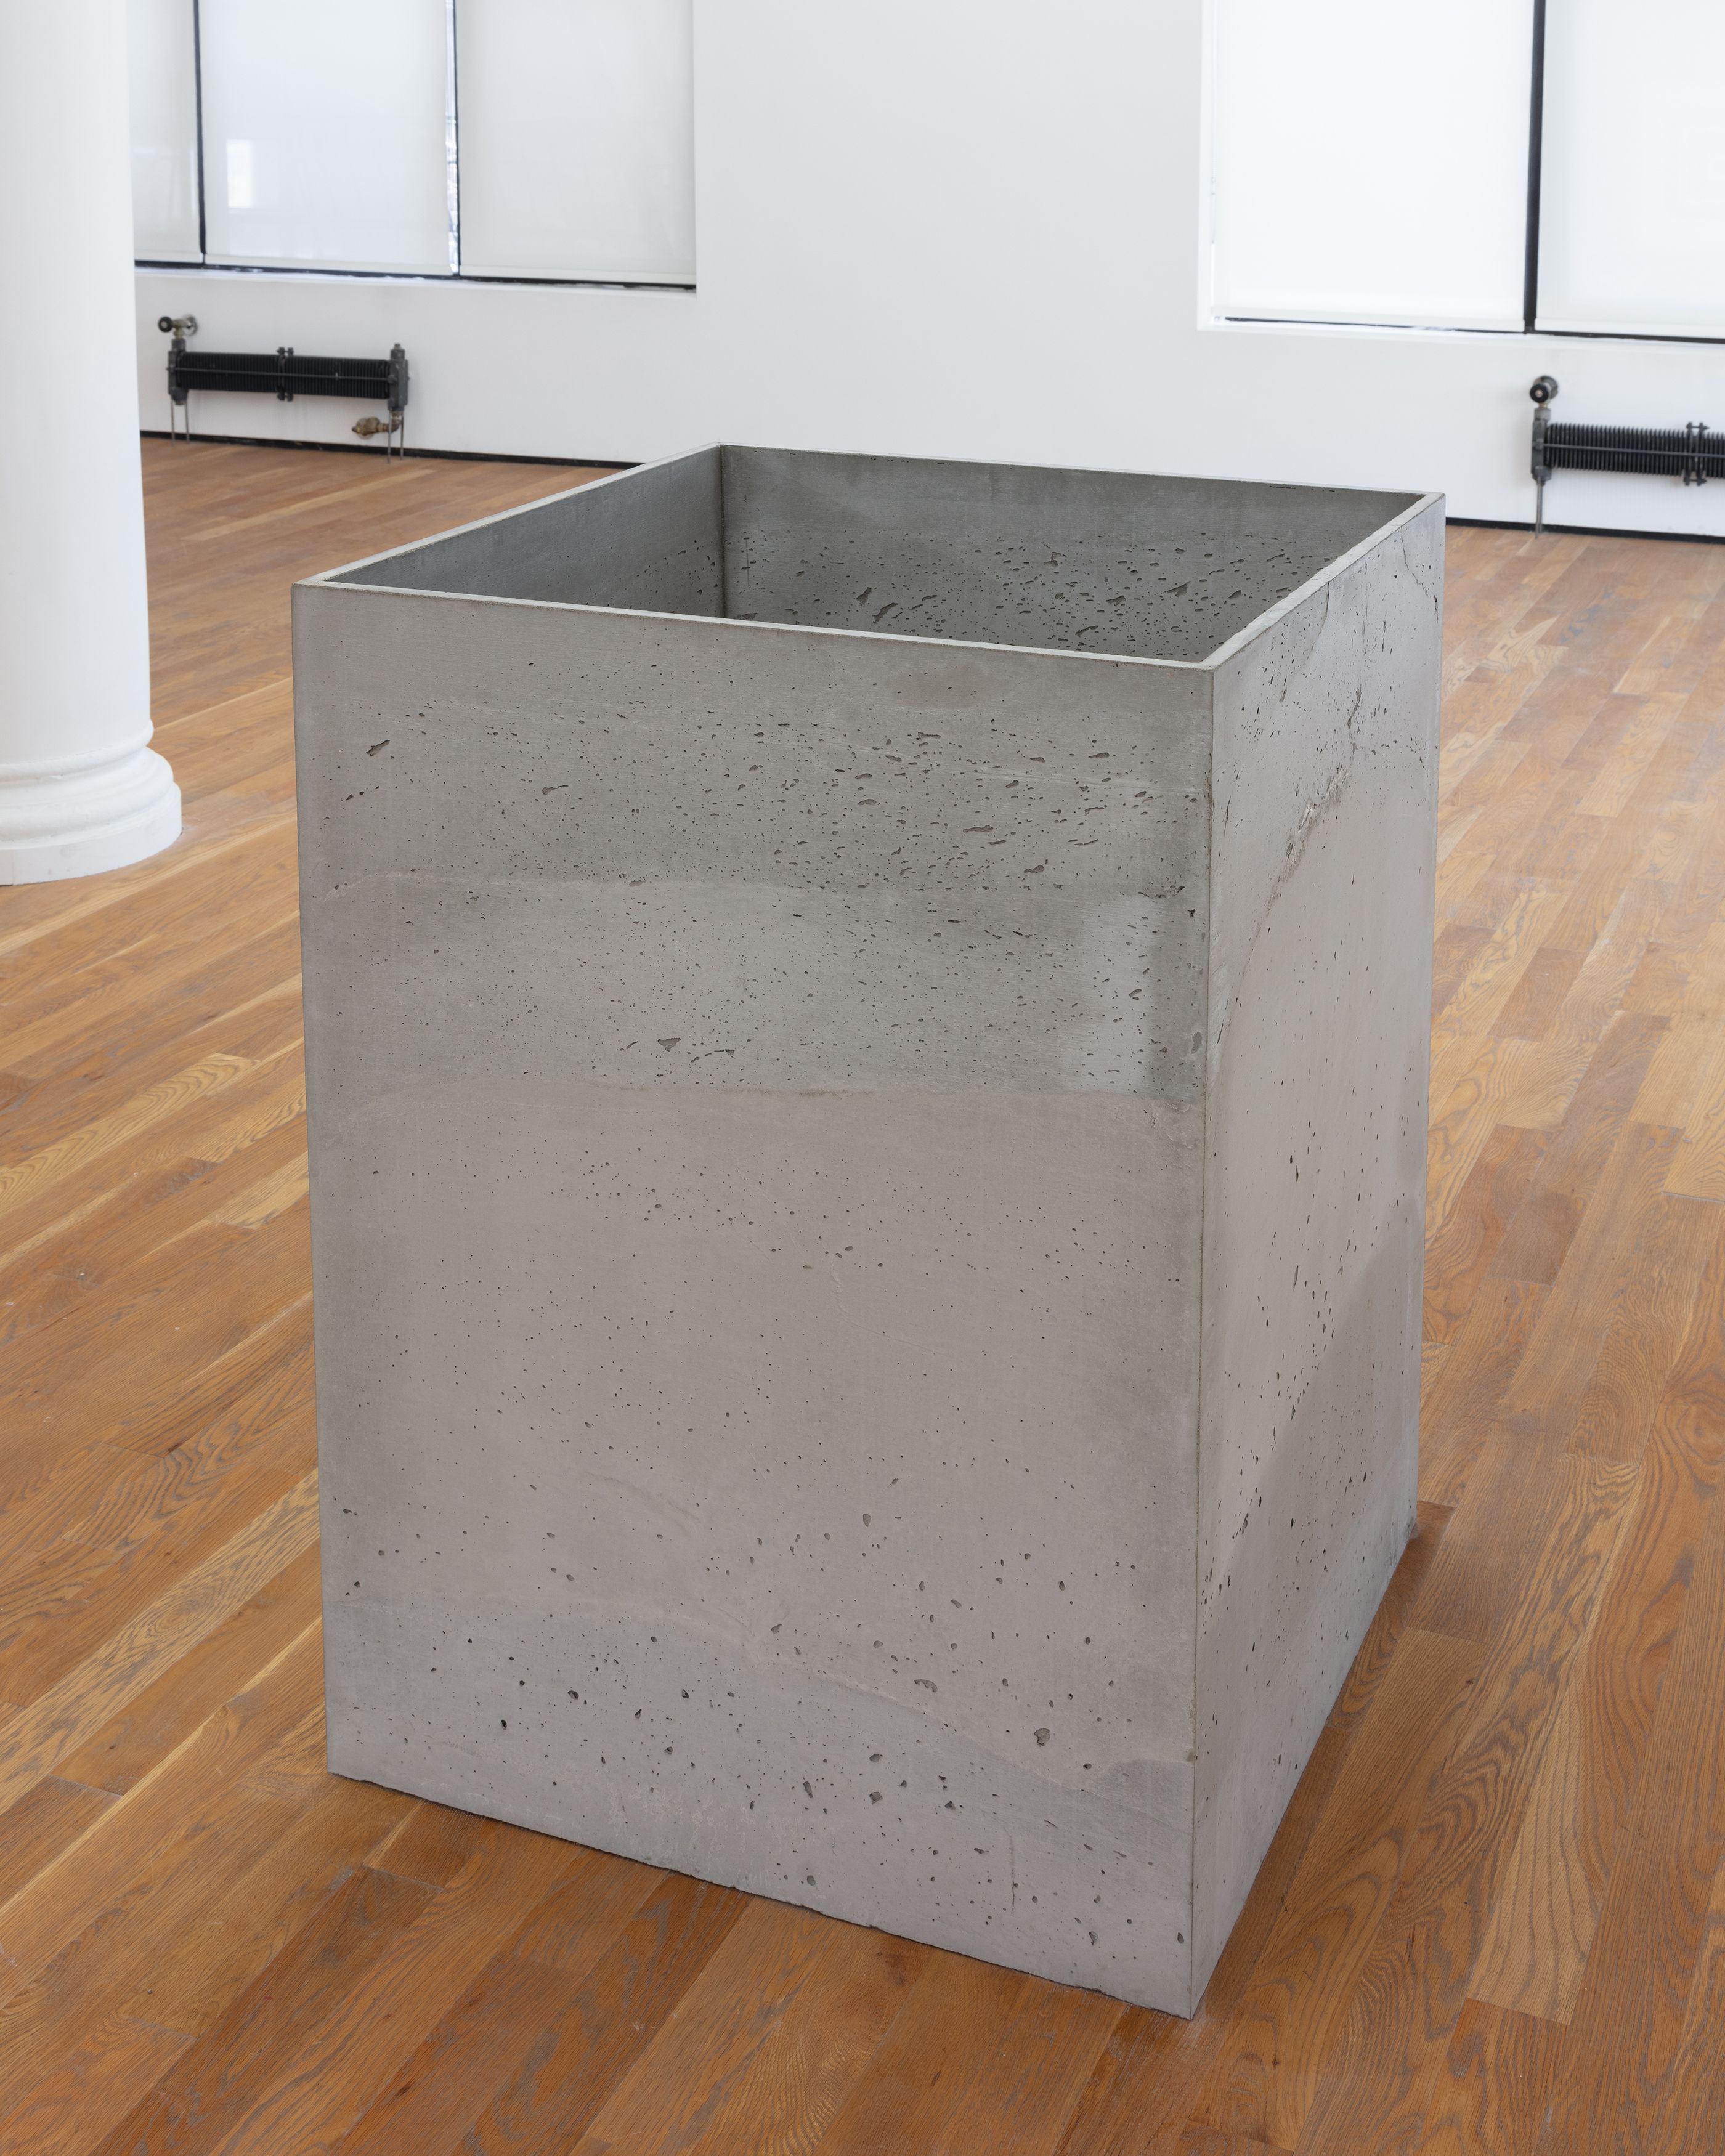 Stephen Lichty, Repose 10, 2021, concrete and crushed granite, 44 x 32 x 32 in. 111.76 x 81.23 x 81.23 cm)